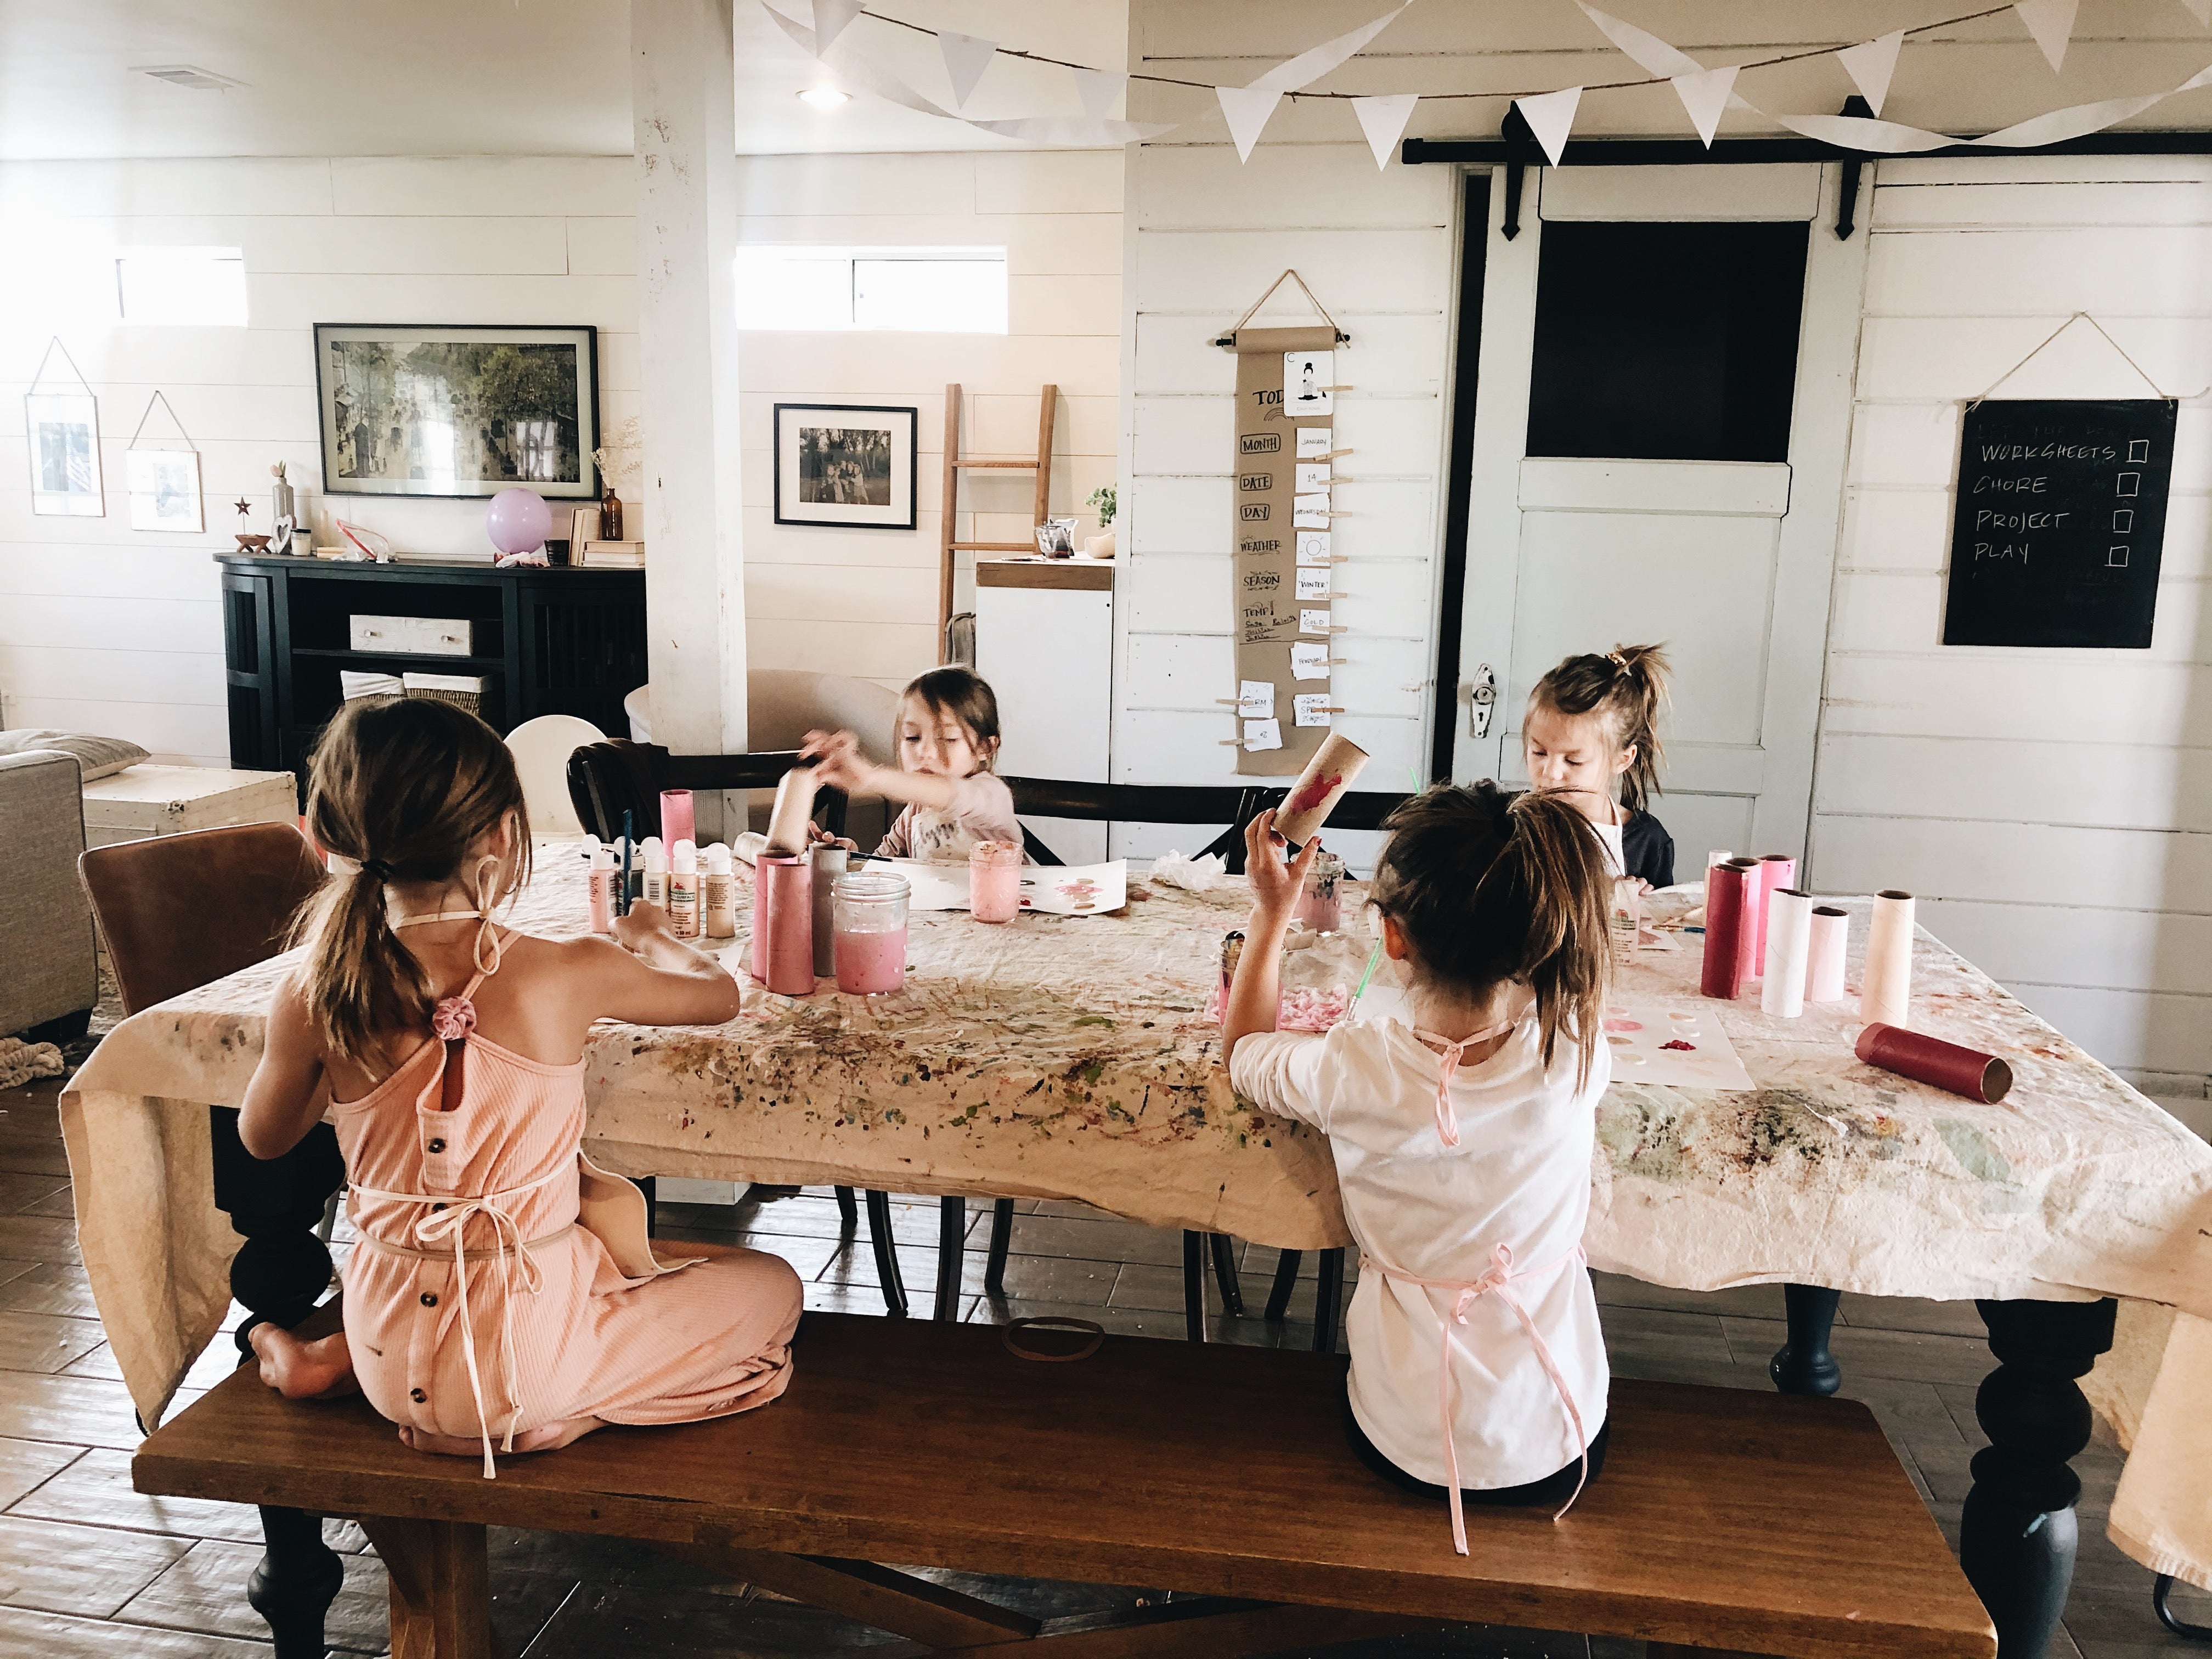 kids painting valentines crafts at their kitchen table